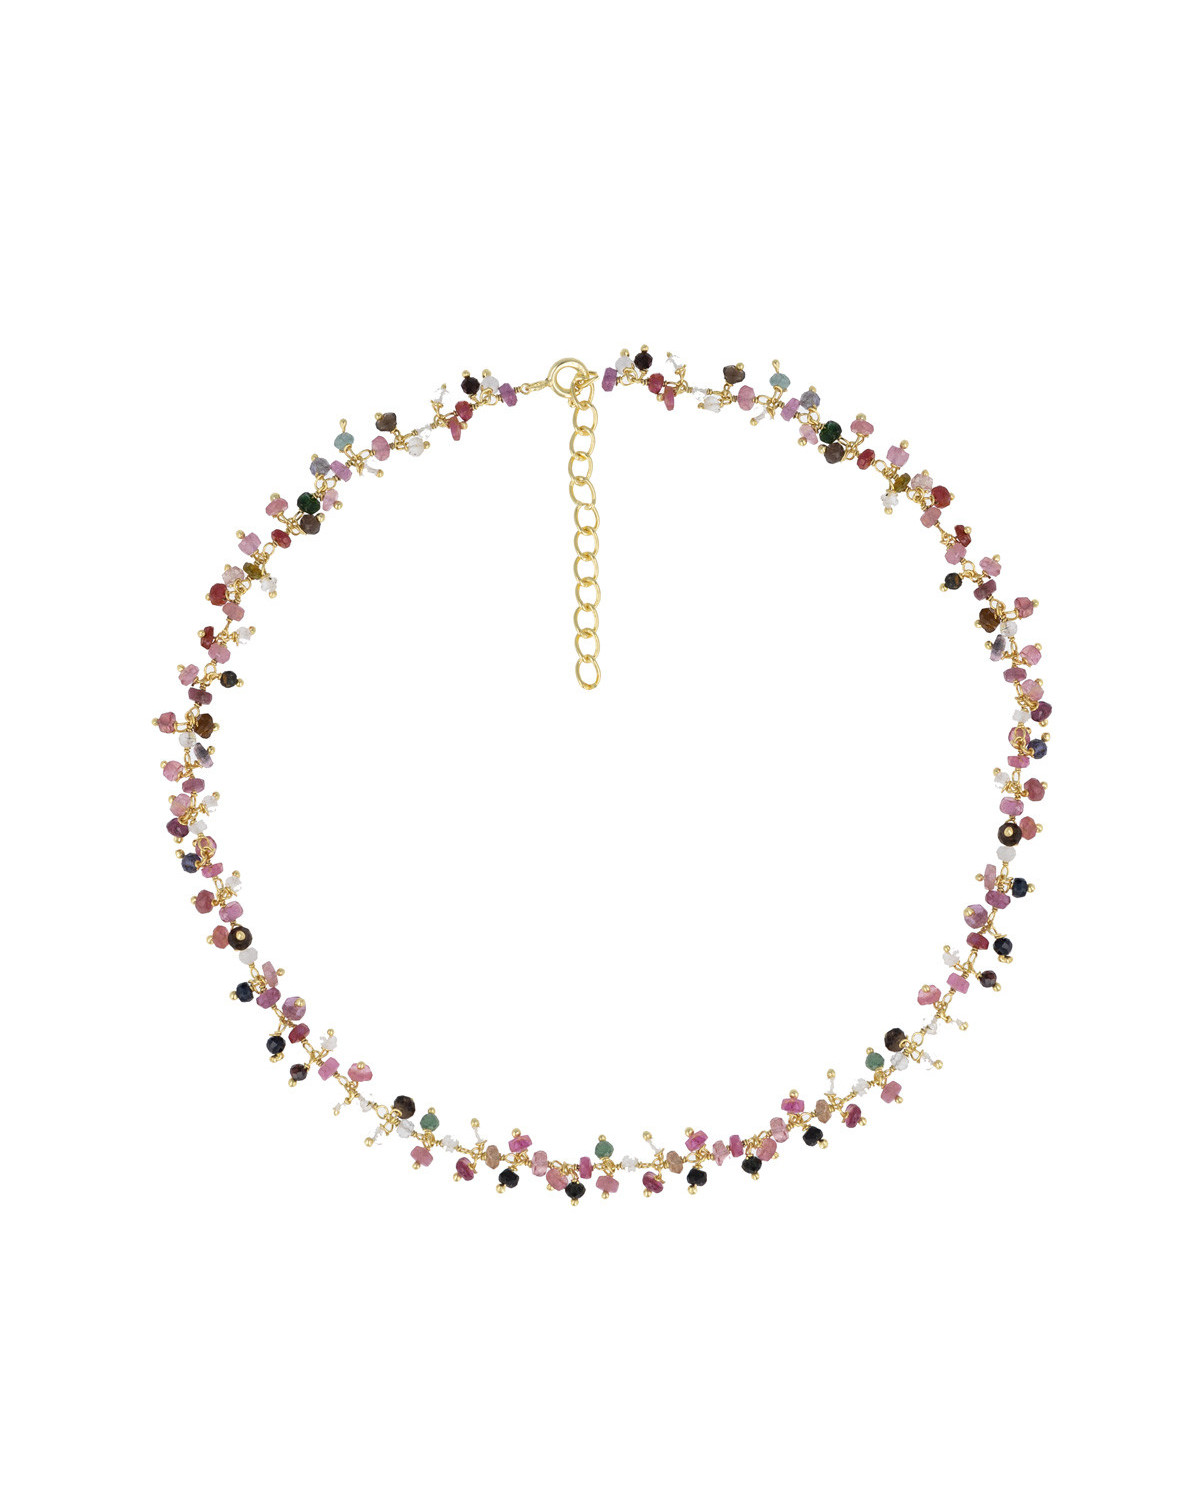 Gold Plated 925 Sterling Silver Tourmaline Necklace